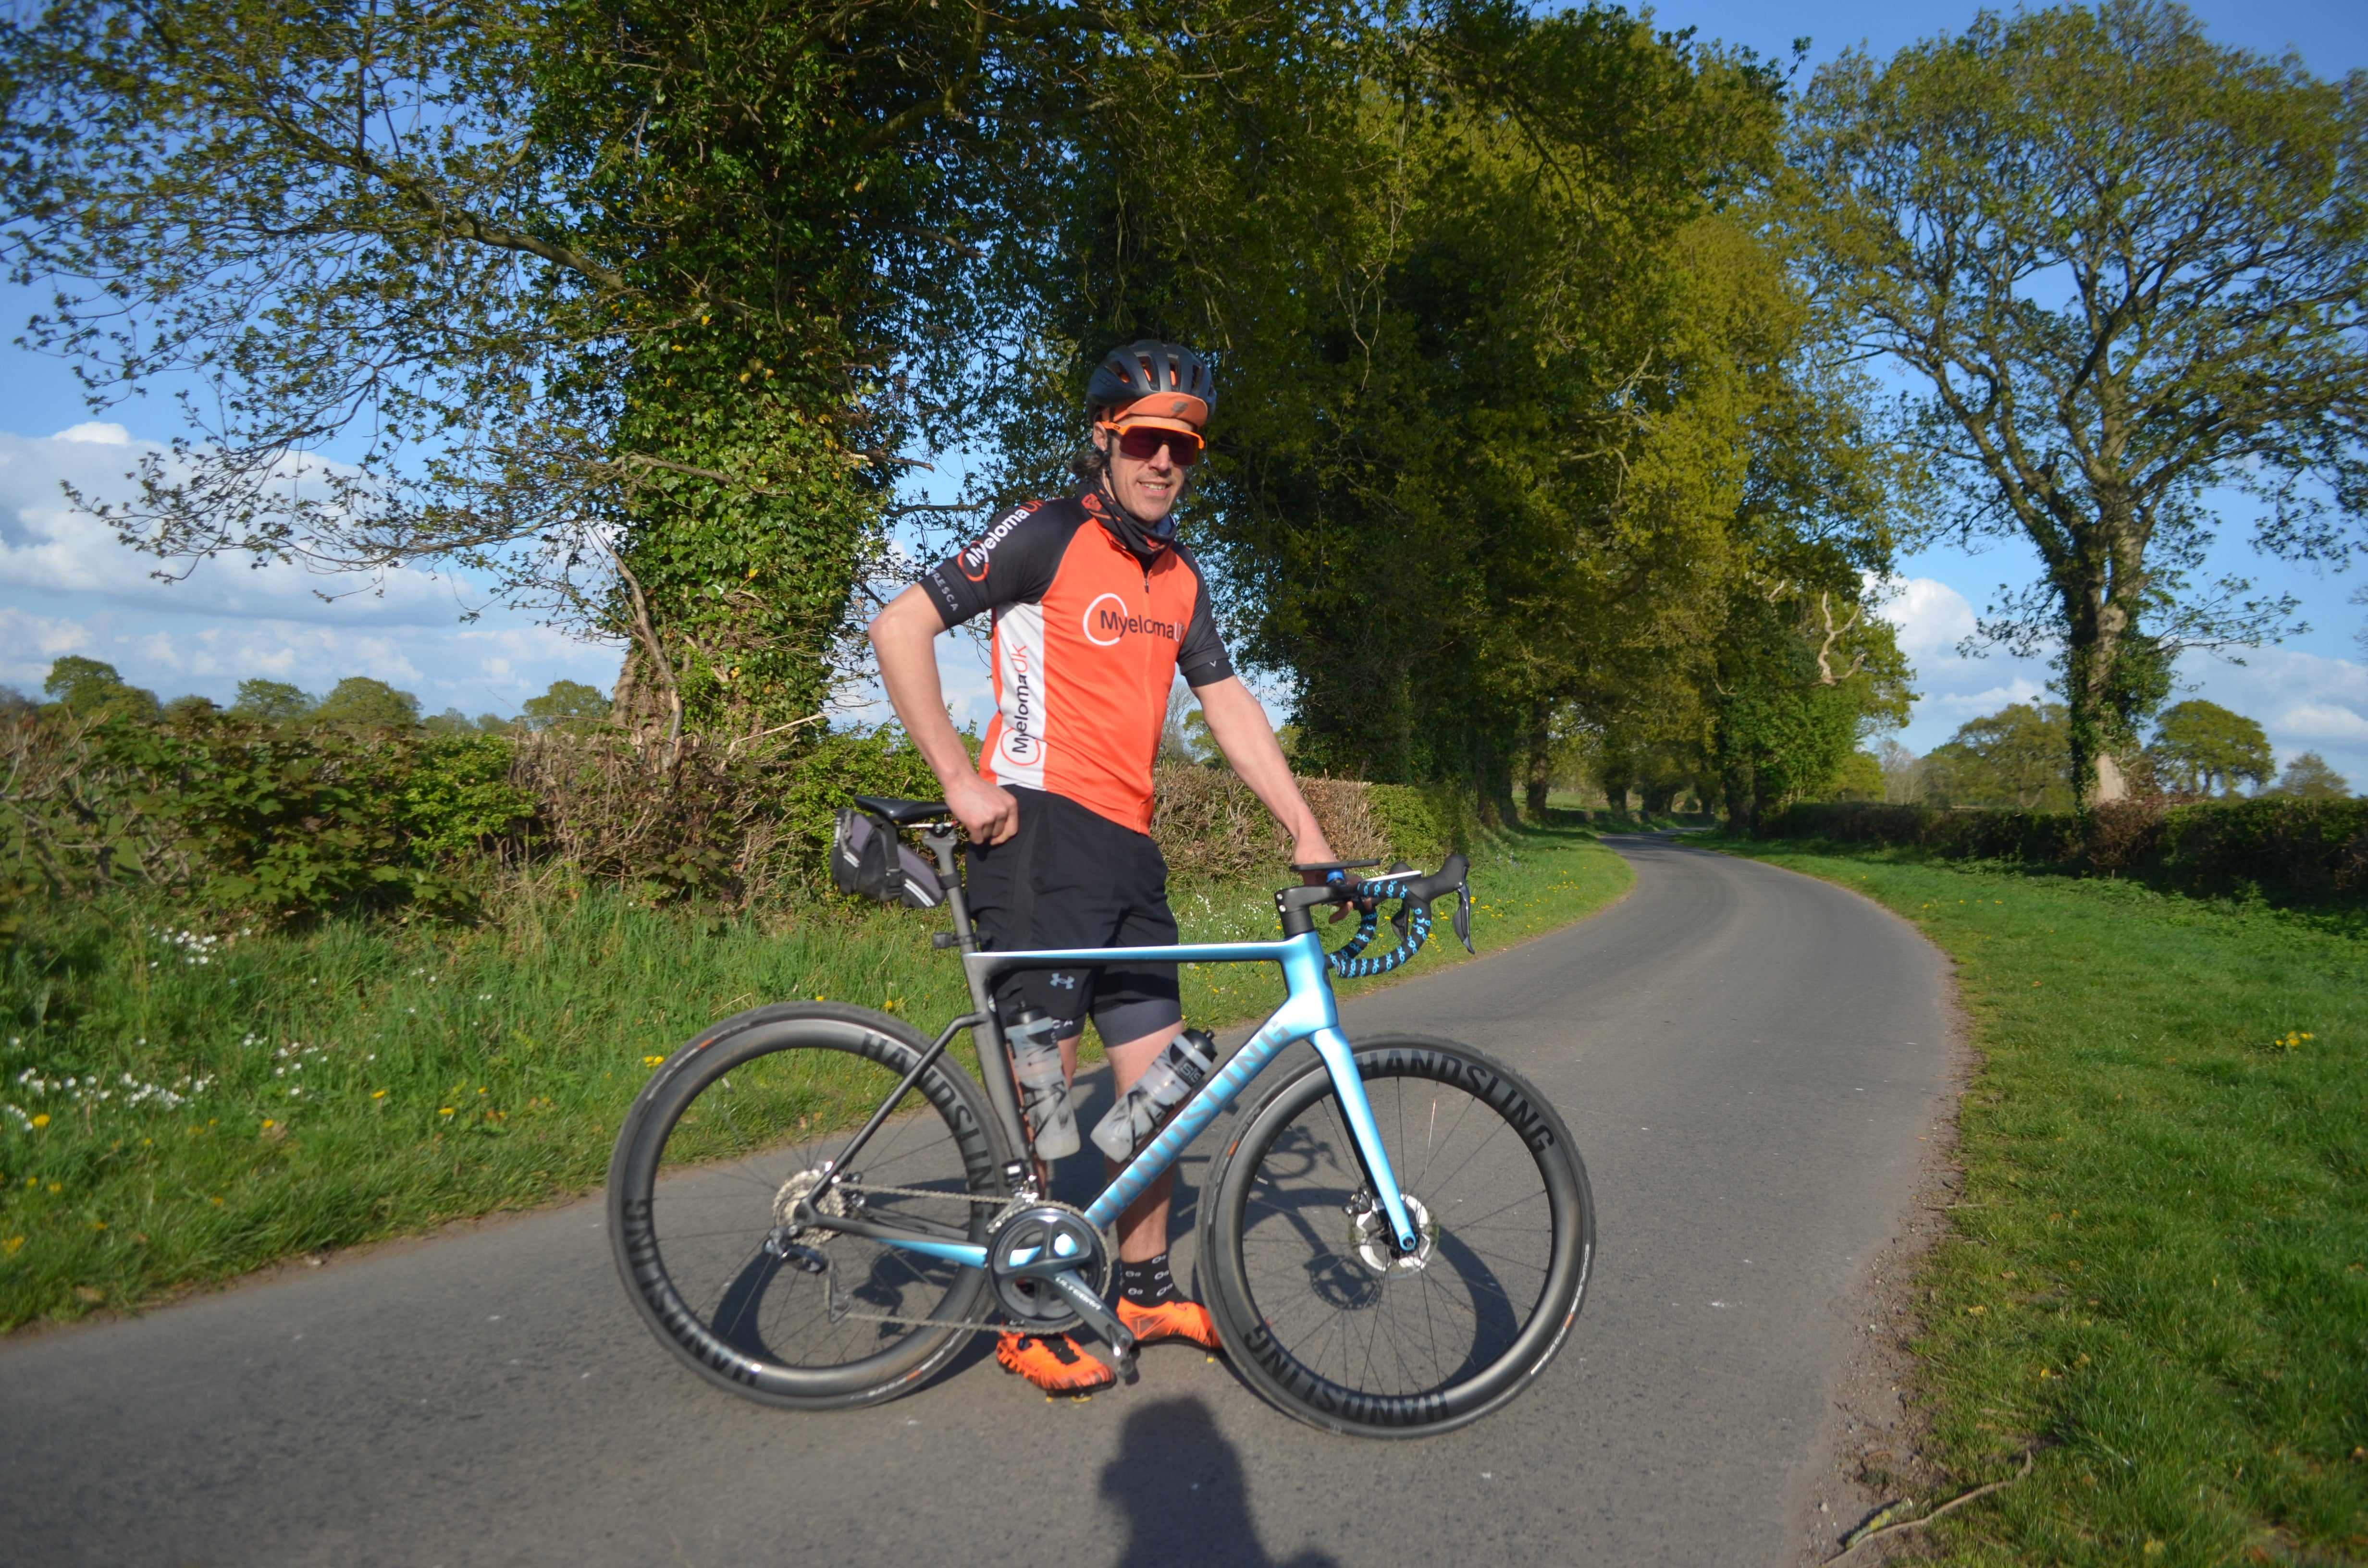 Handsling Rider to Pedal 2,500km for Myeloma Charity